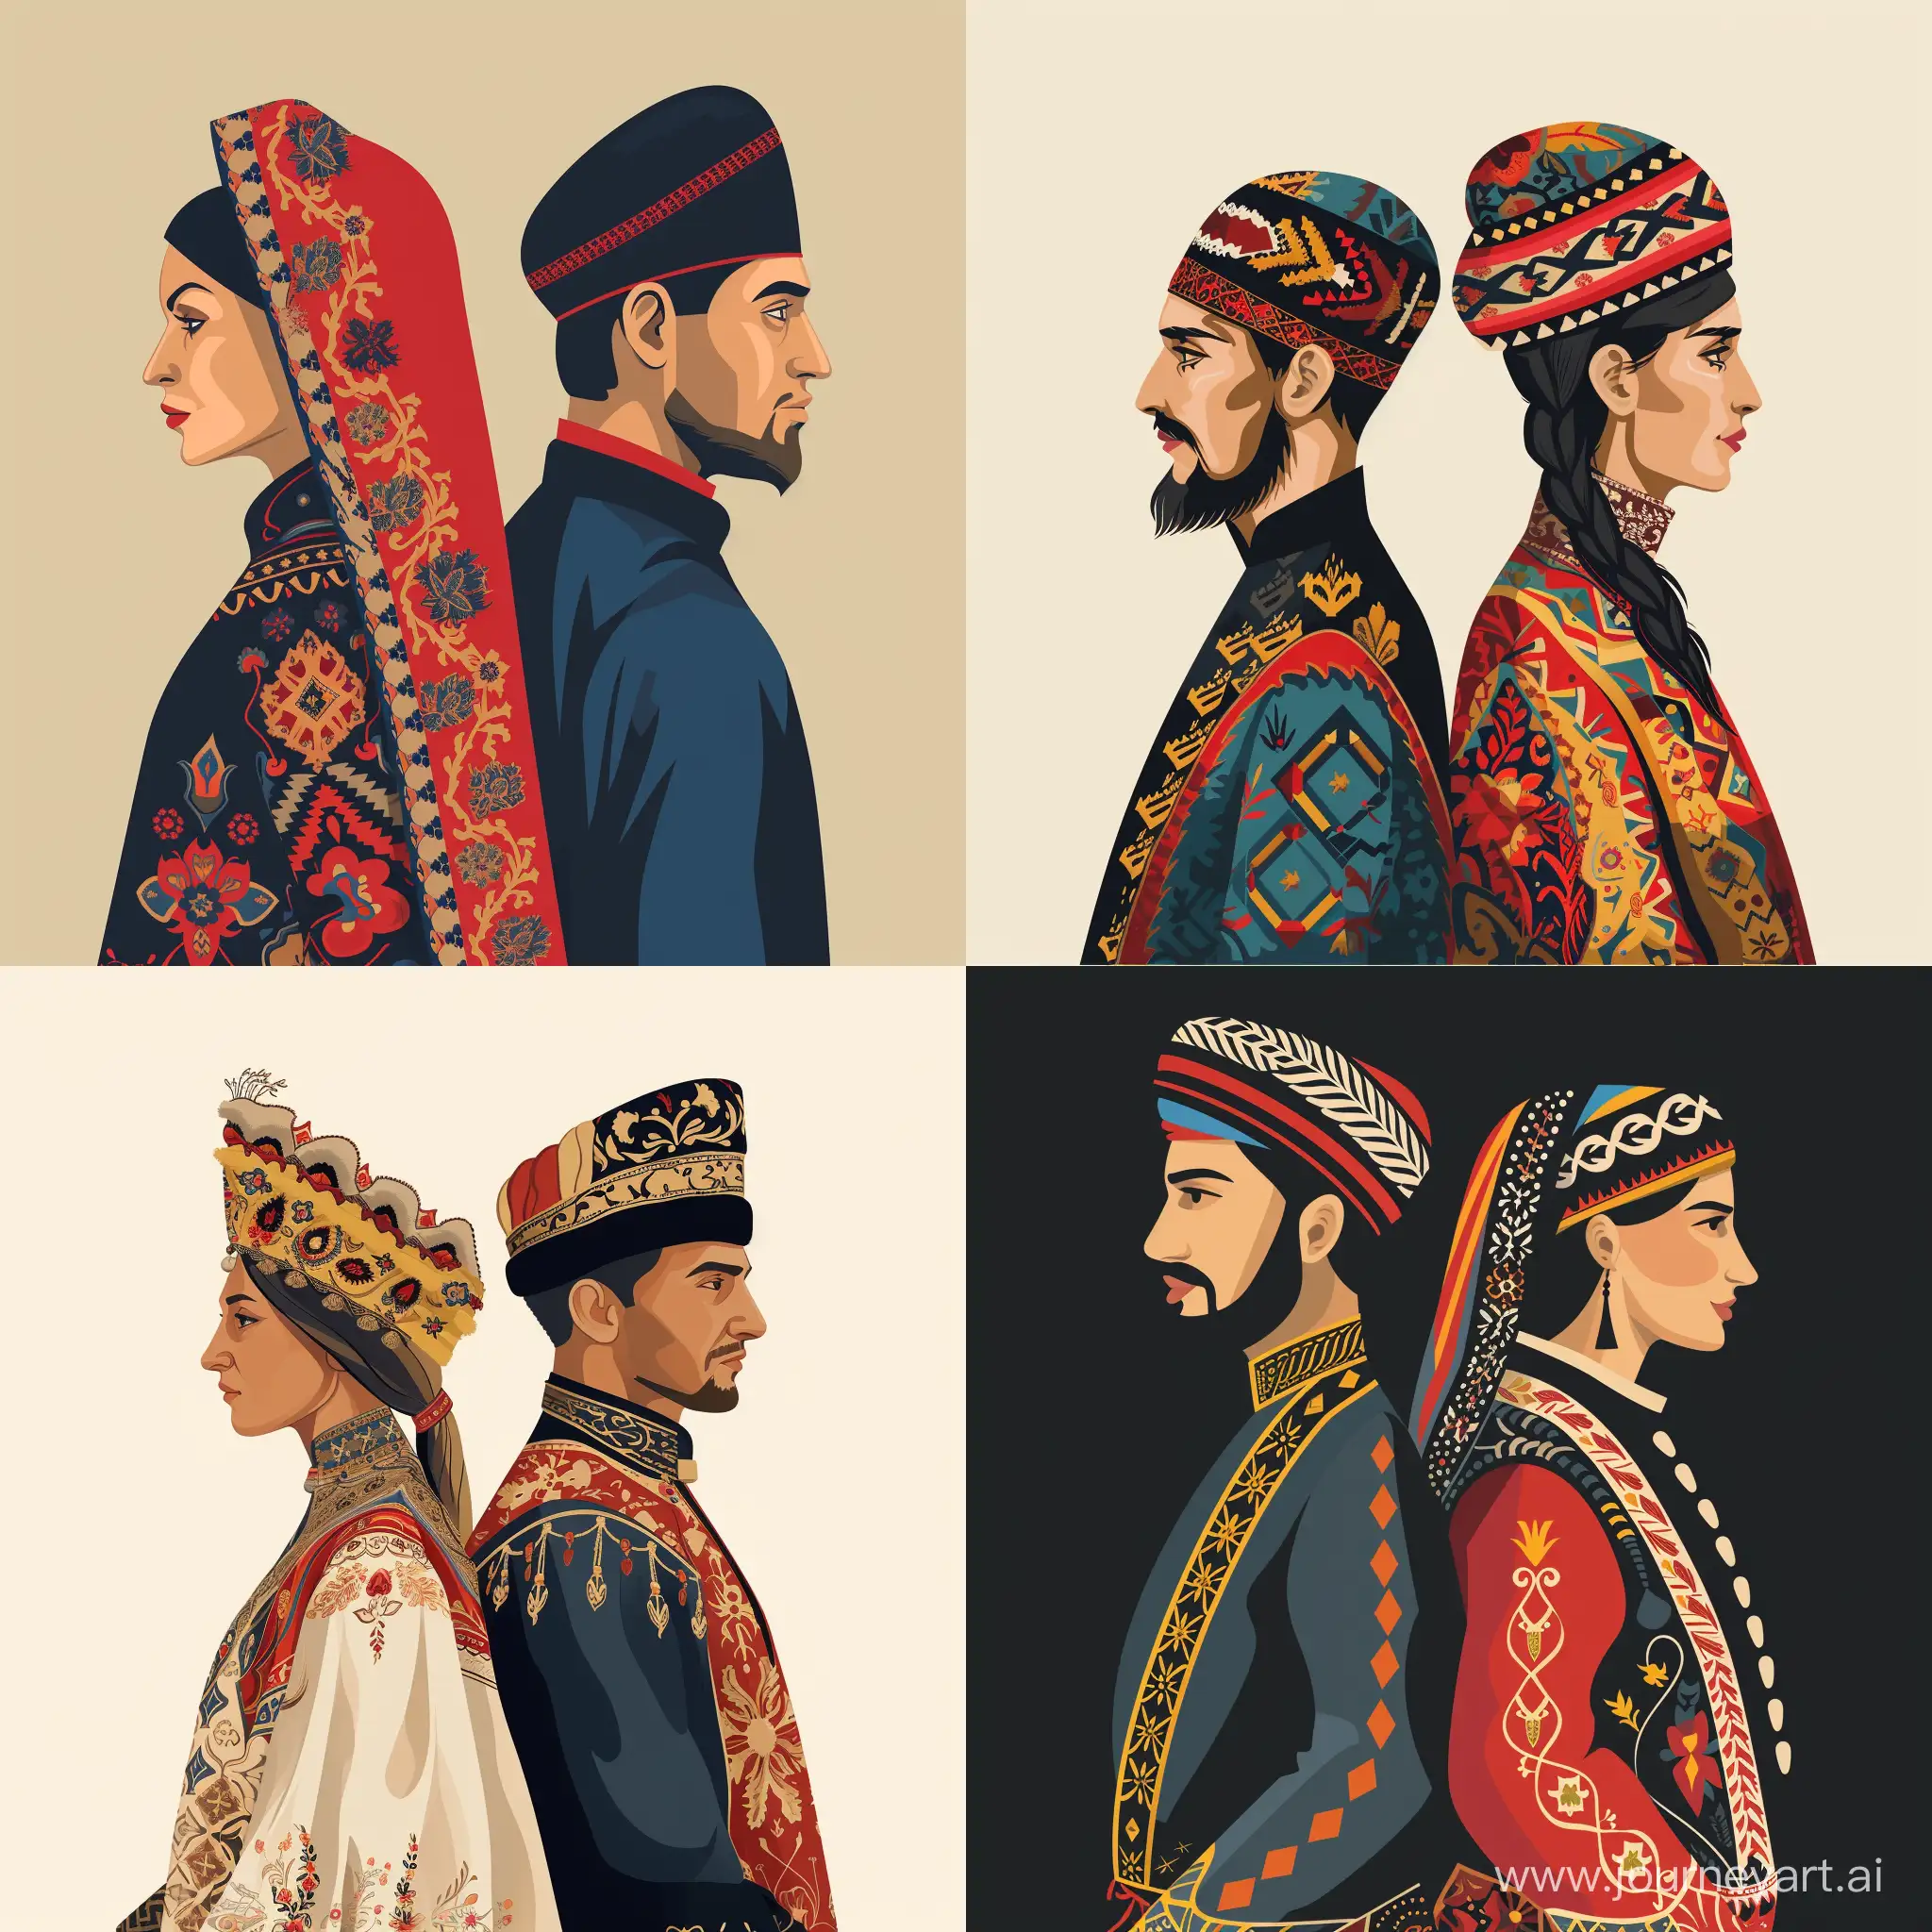 Abkhazian couple man and woman portrait in profile back to back in traditional costumes logo graphics